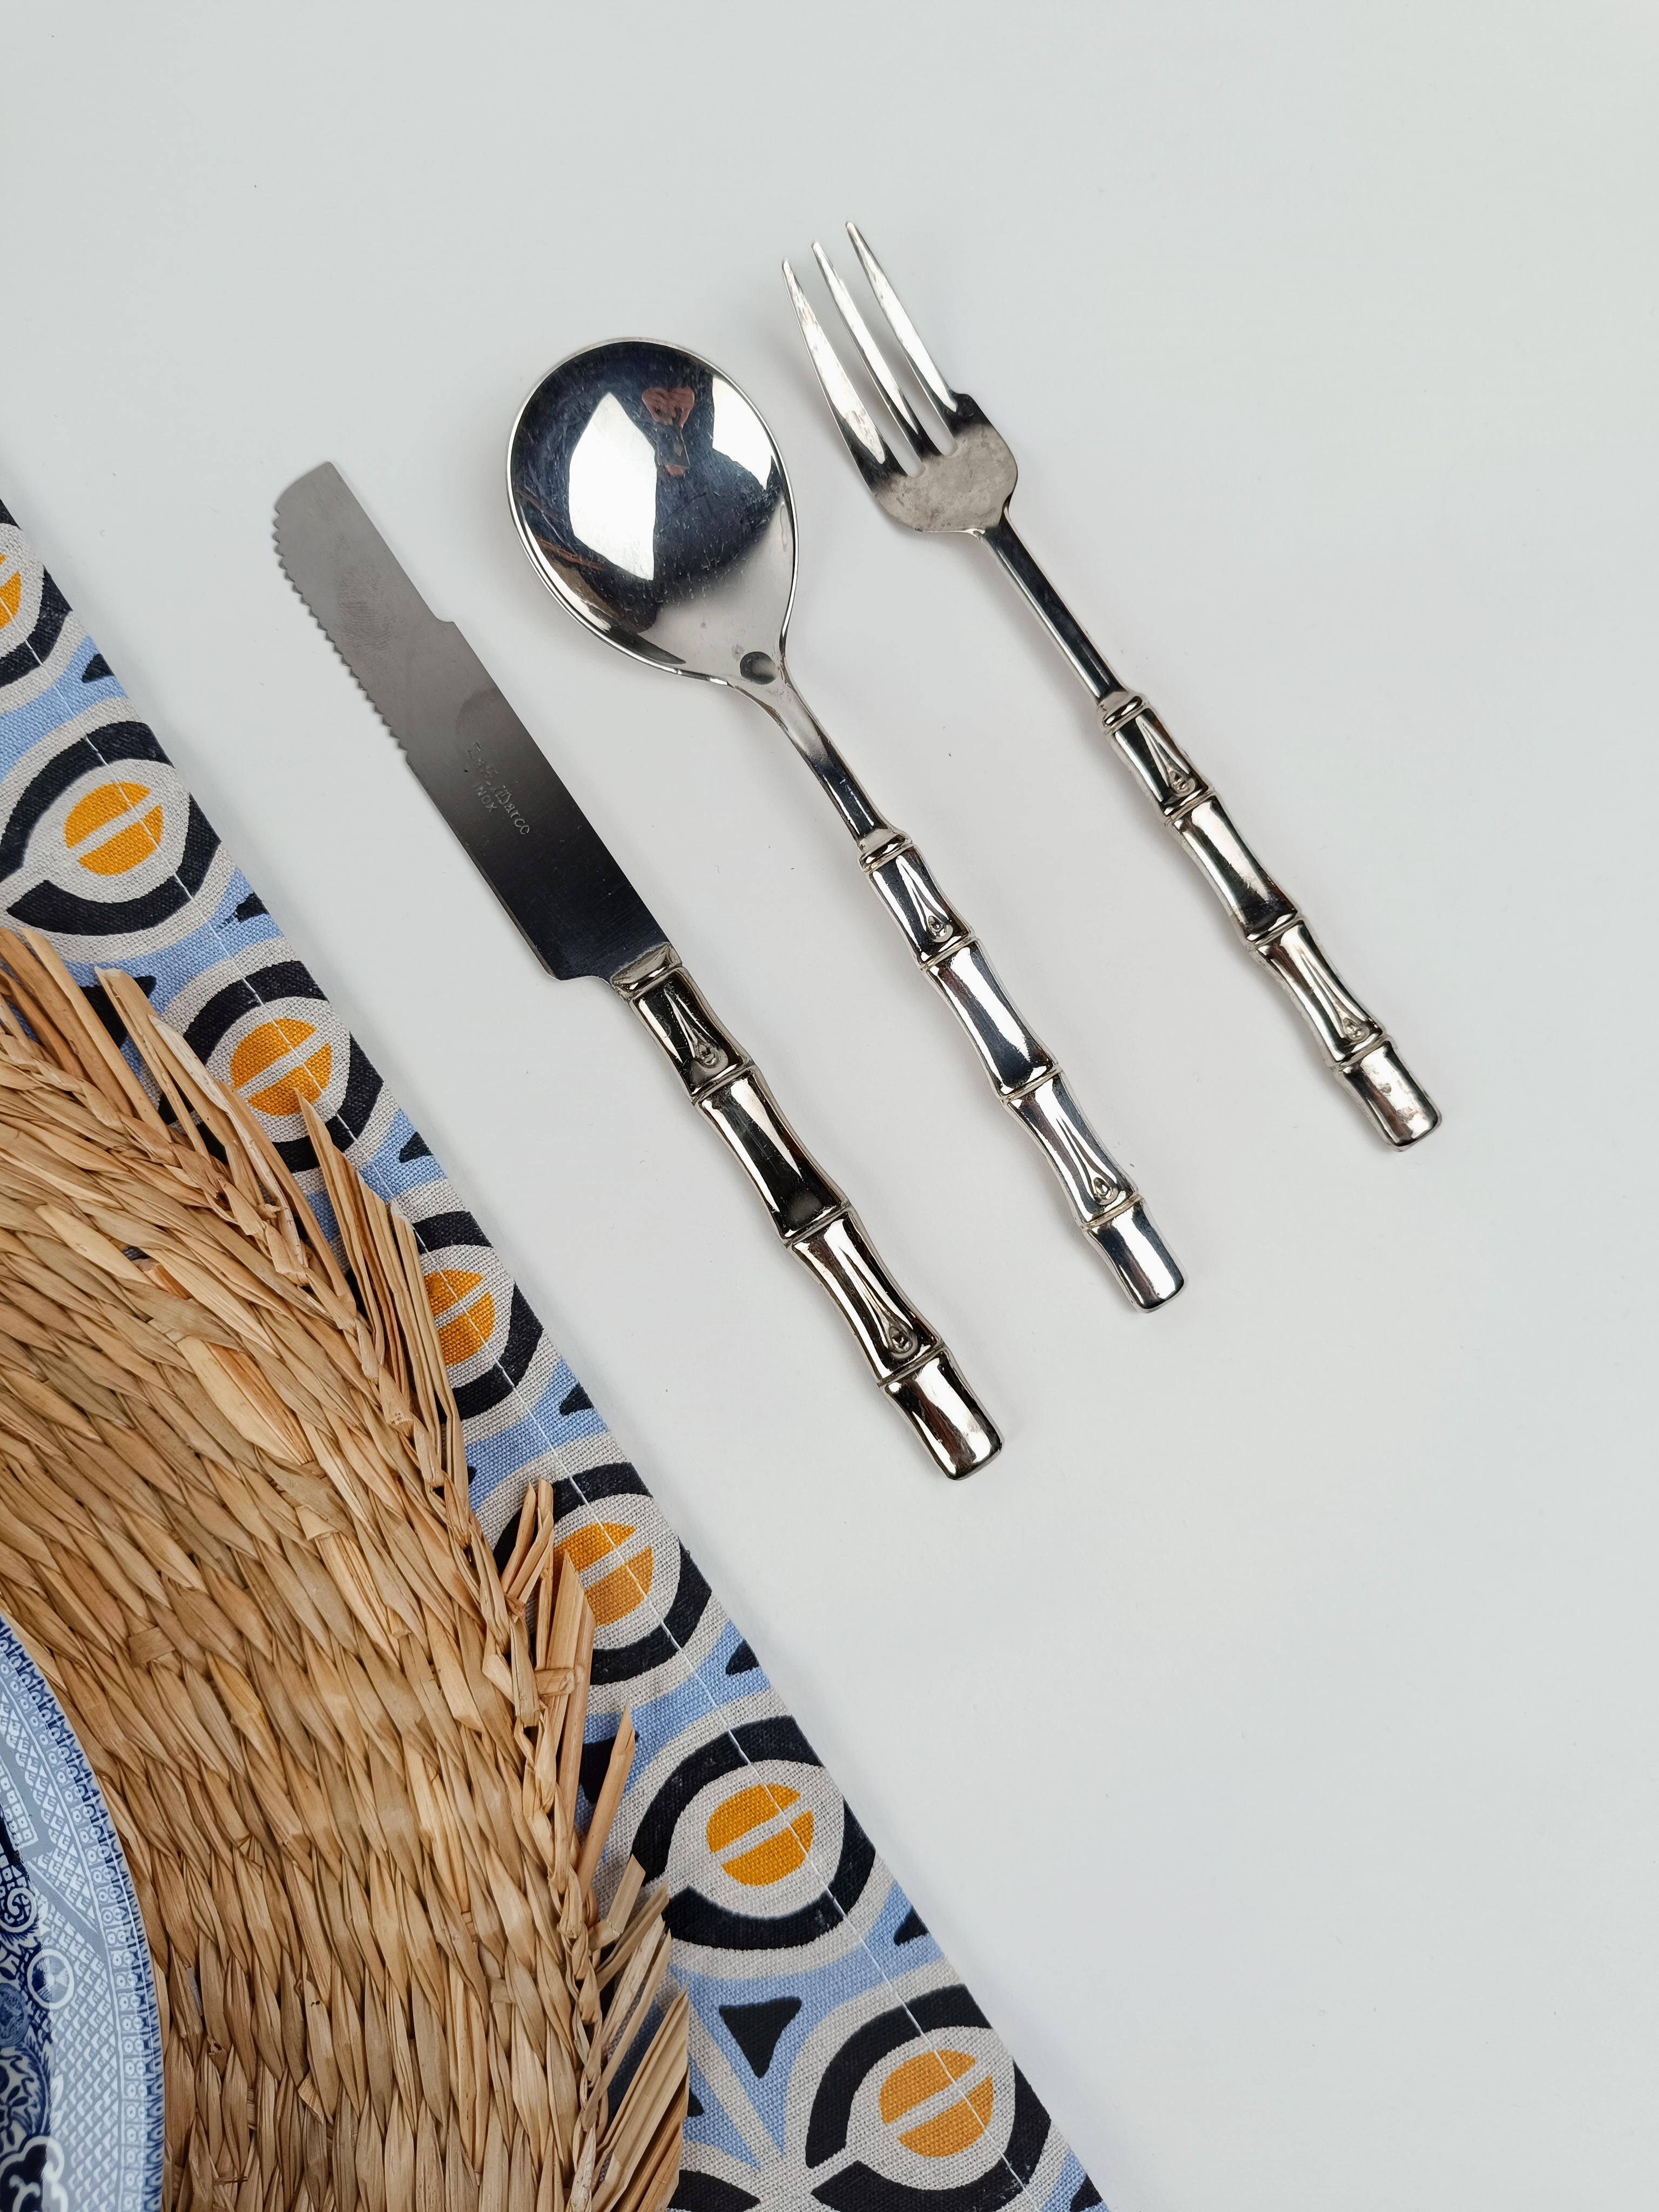 A Mid Century Modern Vintage Flatware set made in Italy by the historic cutlery company 